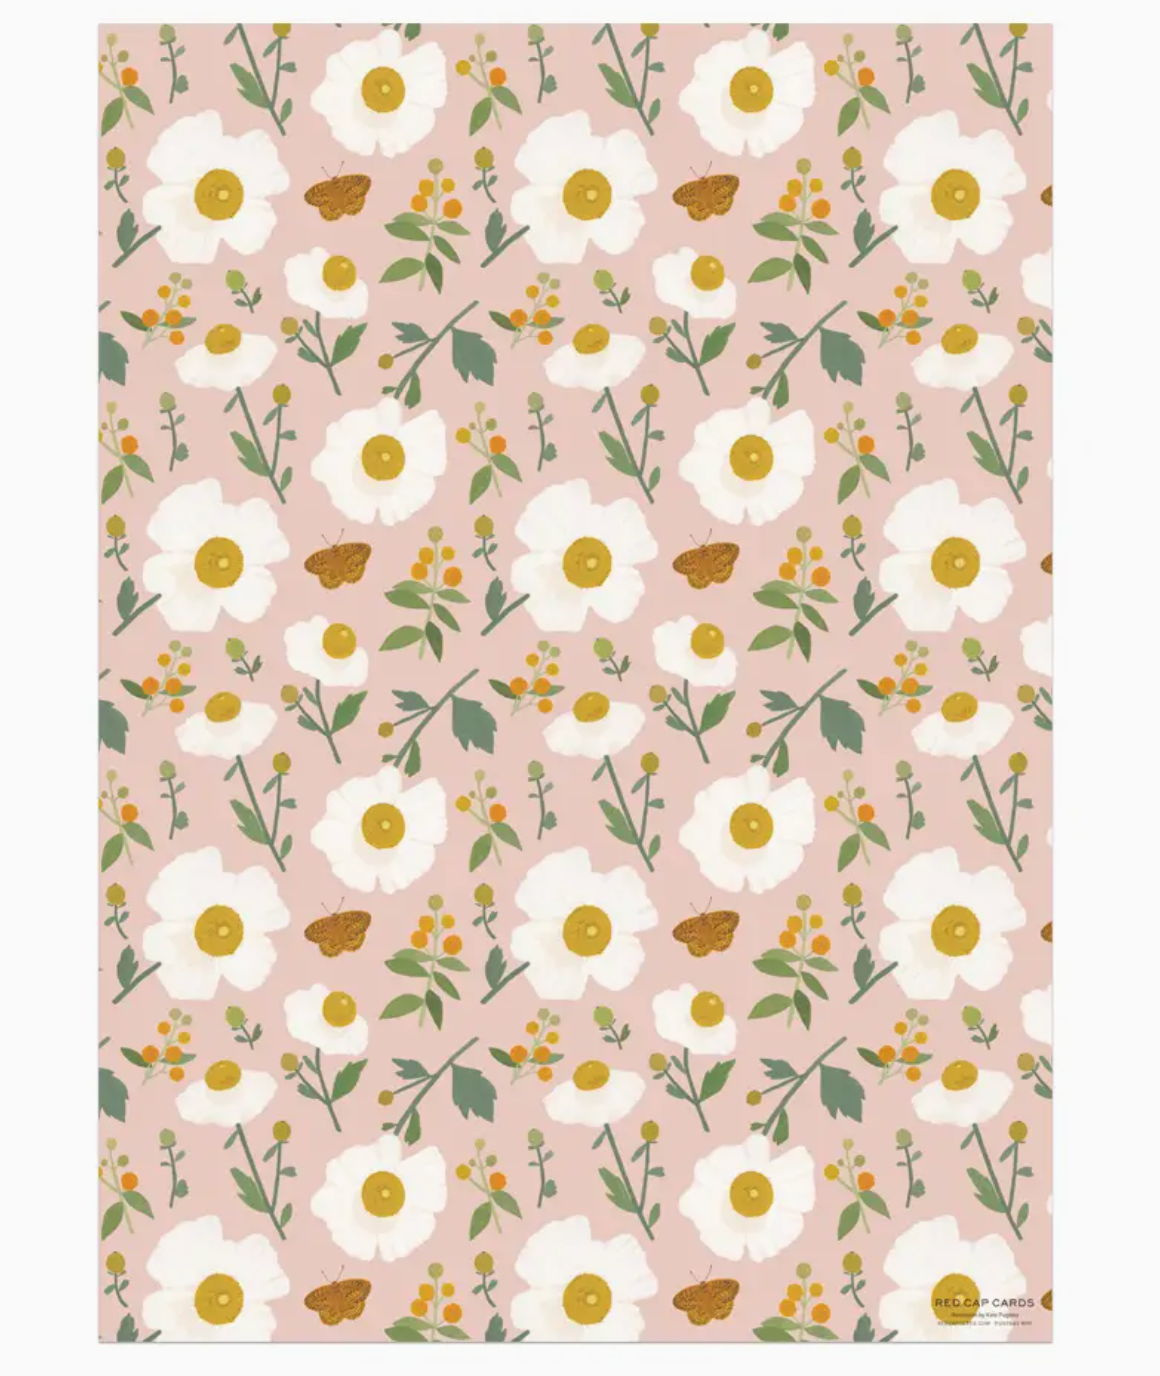 White Poppies Wrapping Paper